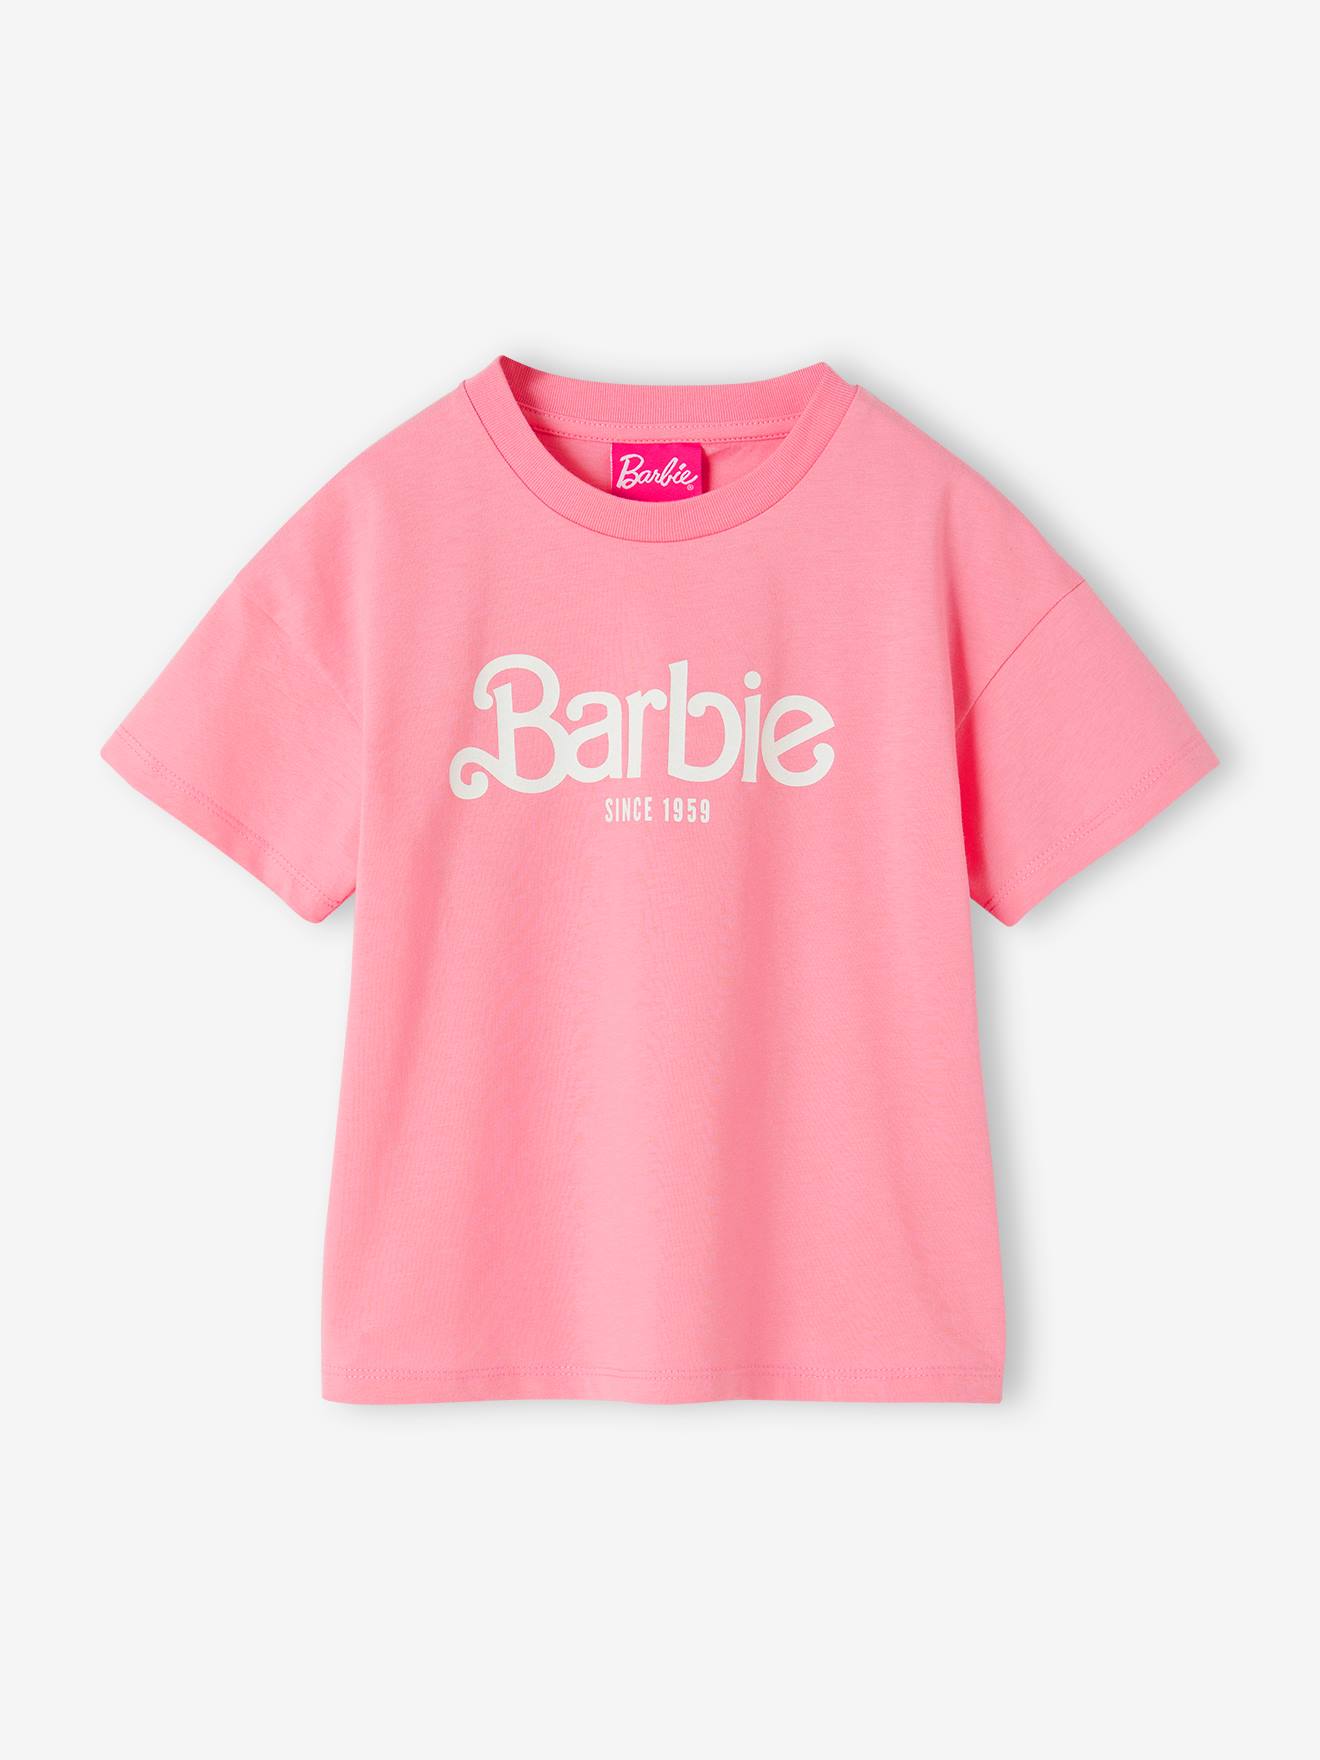 Barbie(r) T-Shirt for Girls sweet pink